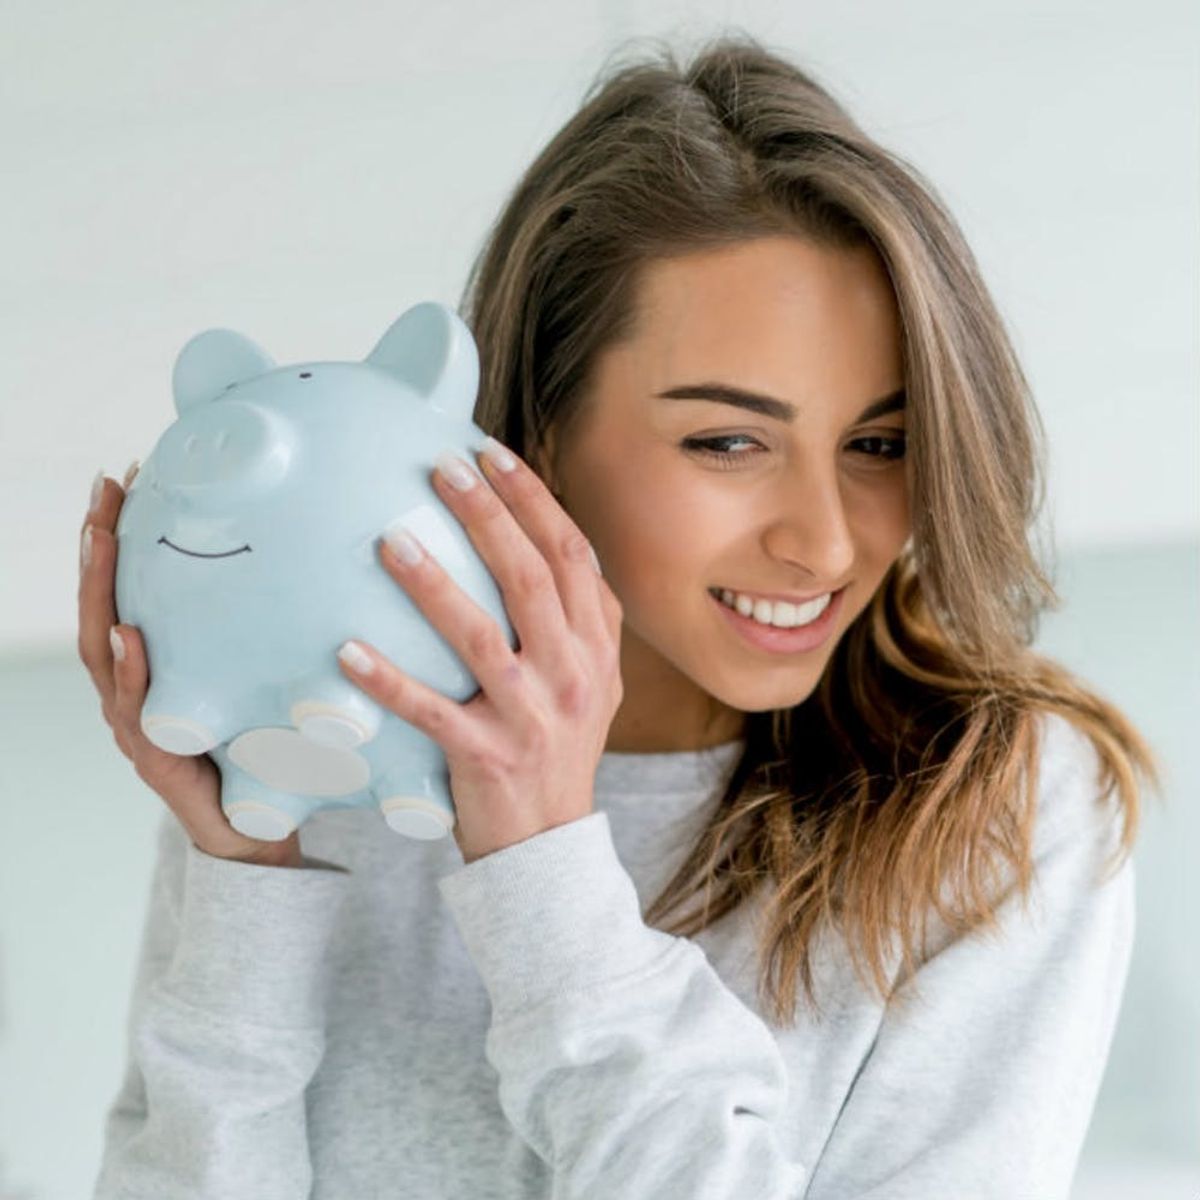 7 Easy Ways to Start Saving for Retirement in Your 20s